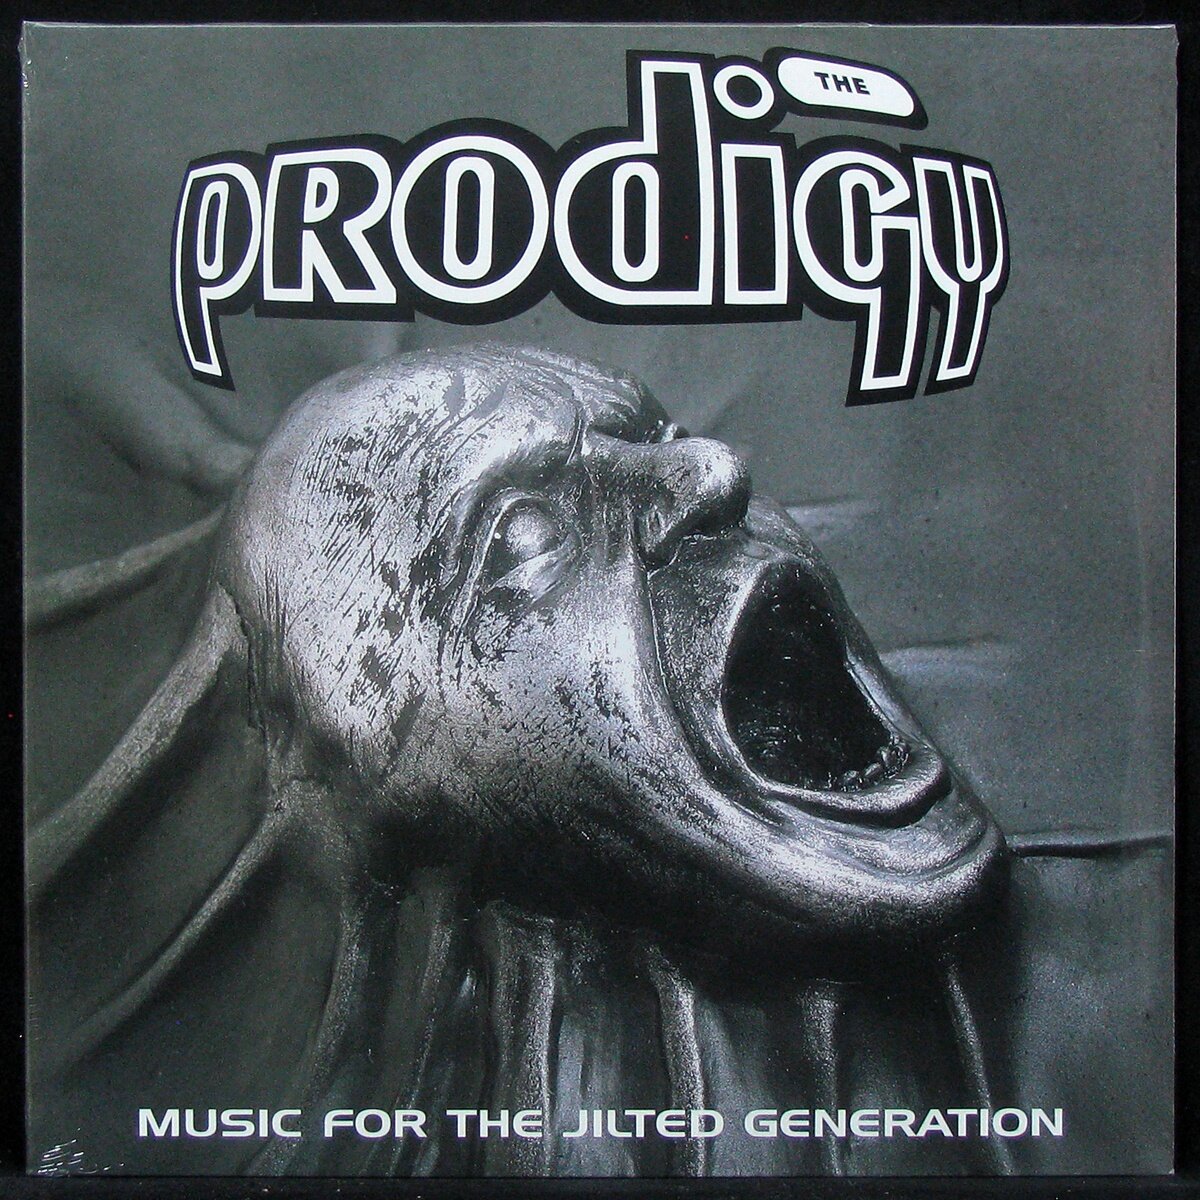 Виниловая пластинка XL The Prodigy – Music For The Jilted Generation (2LP)